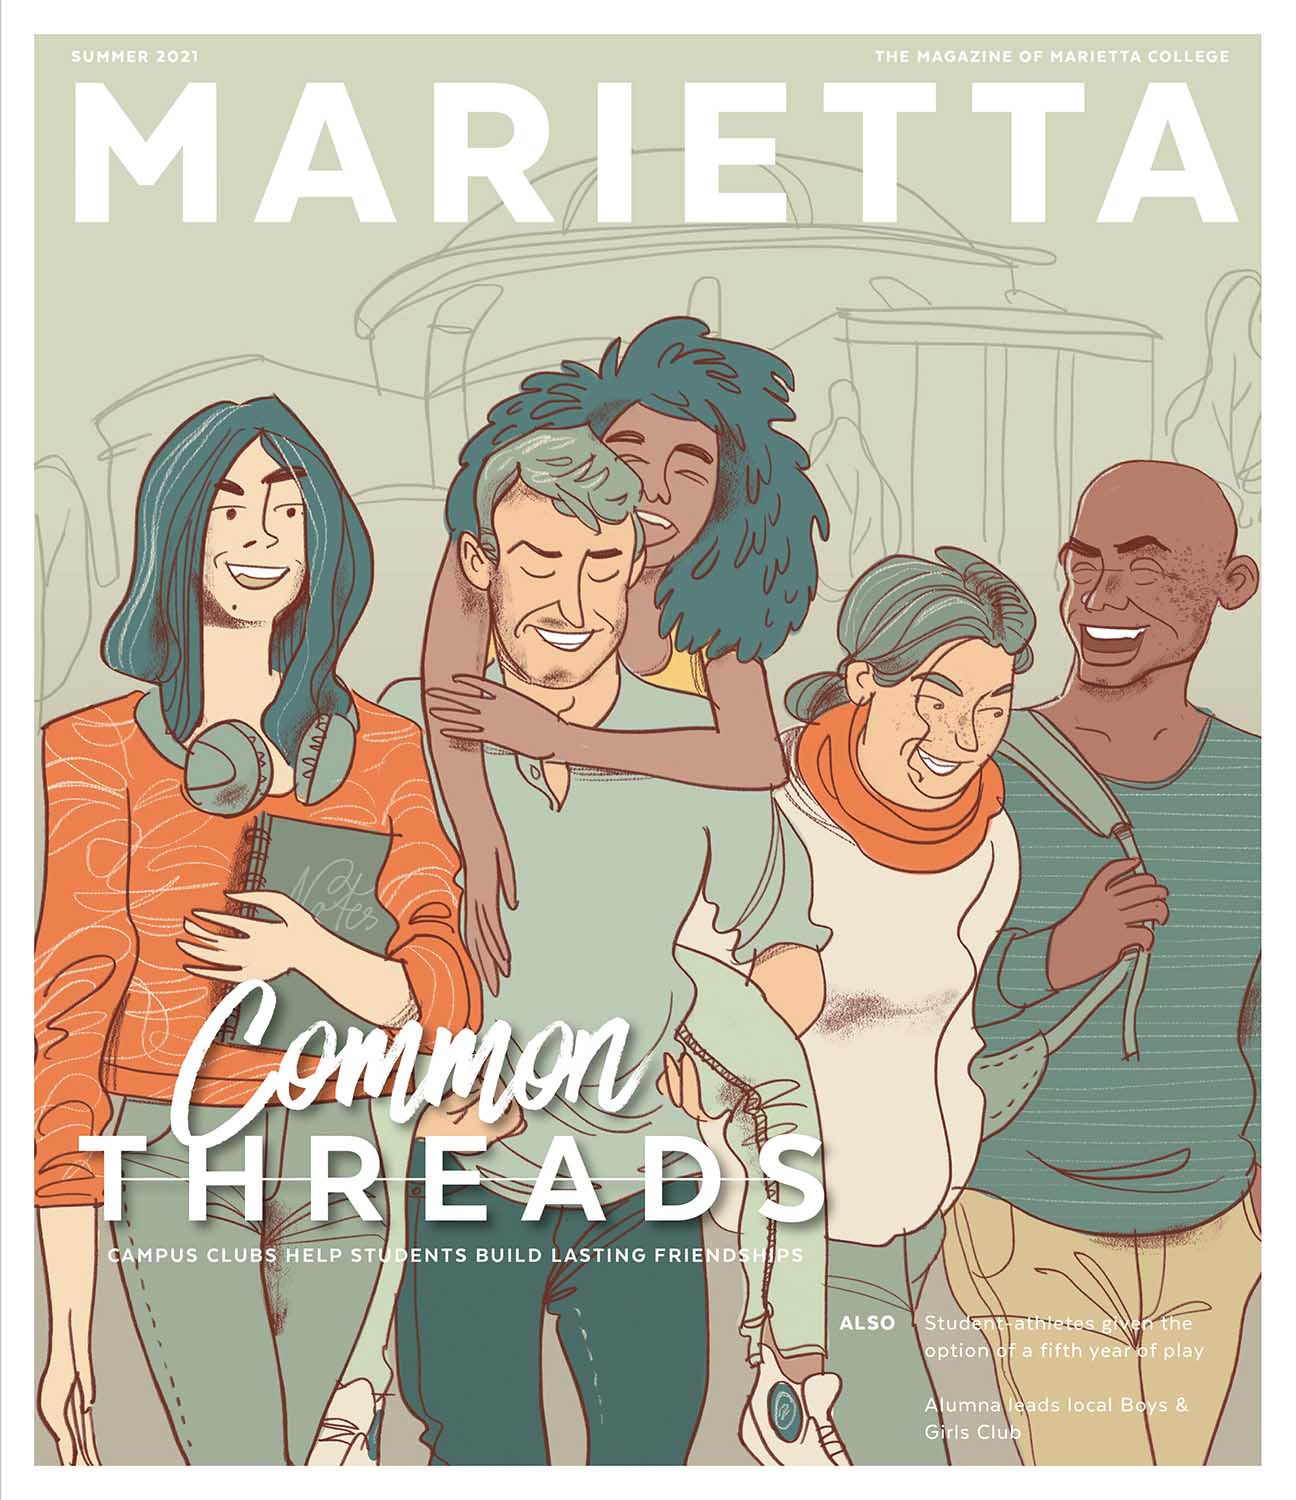 Marietta College Summer 2021 Cover is an illustration of 5 students walking down the Mall at Marietta College